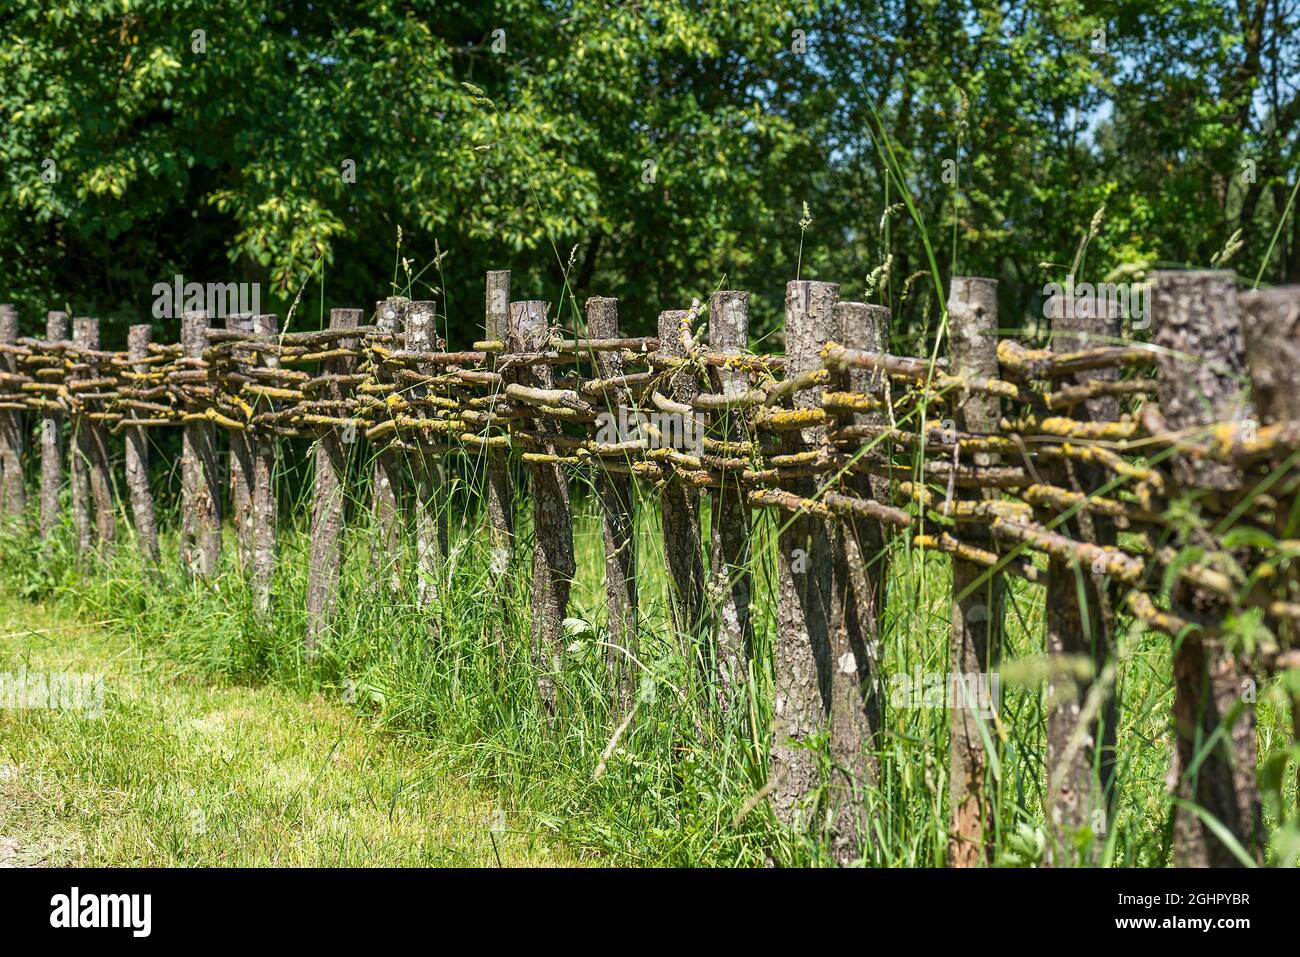 Wooden fence connected with thin branches in wickerwork, Franconian Open Air Museum, Bad Windsheim, Middle Franconia, Bavaria, Germany Stock Photo